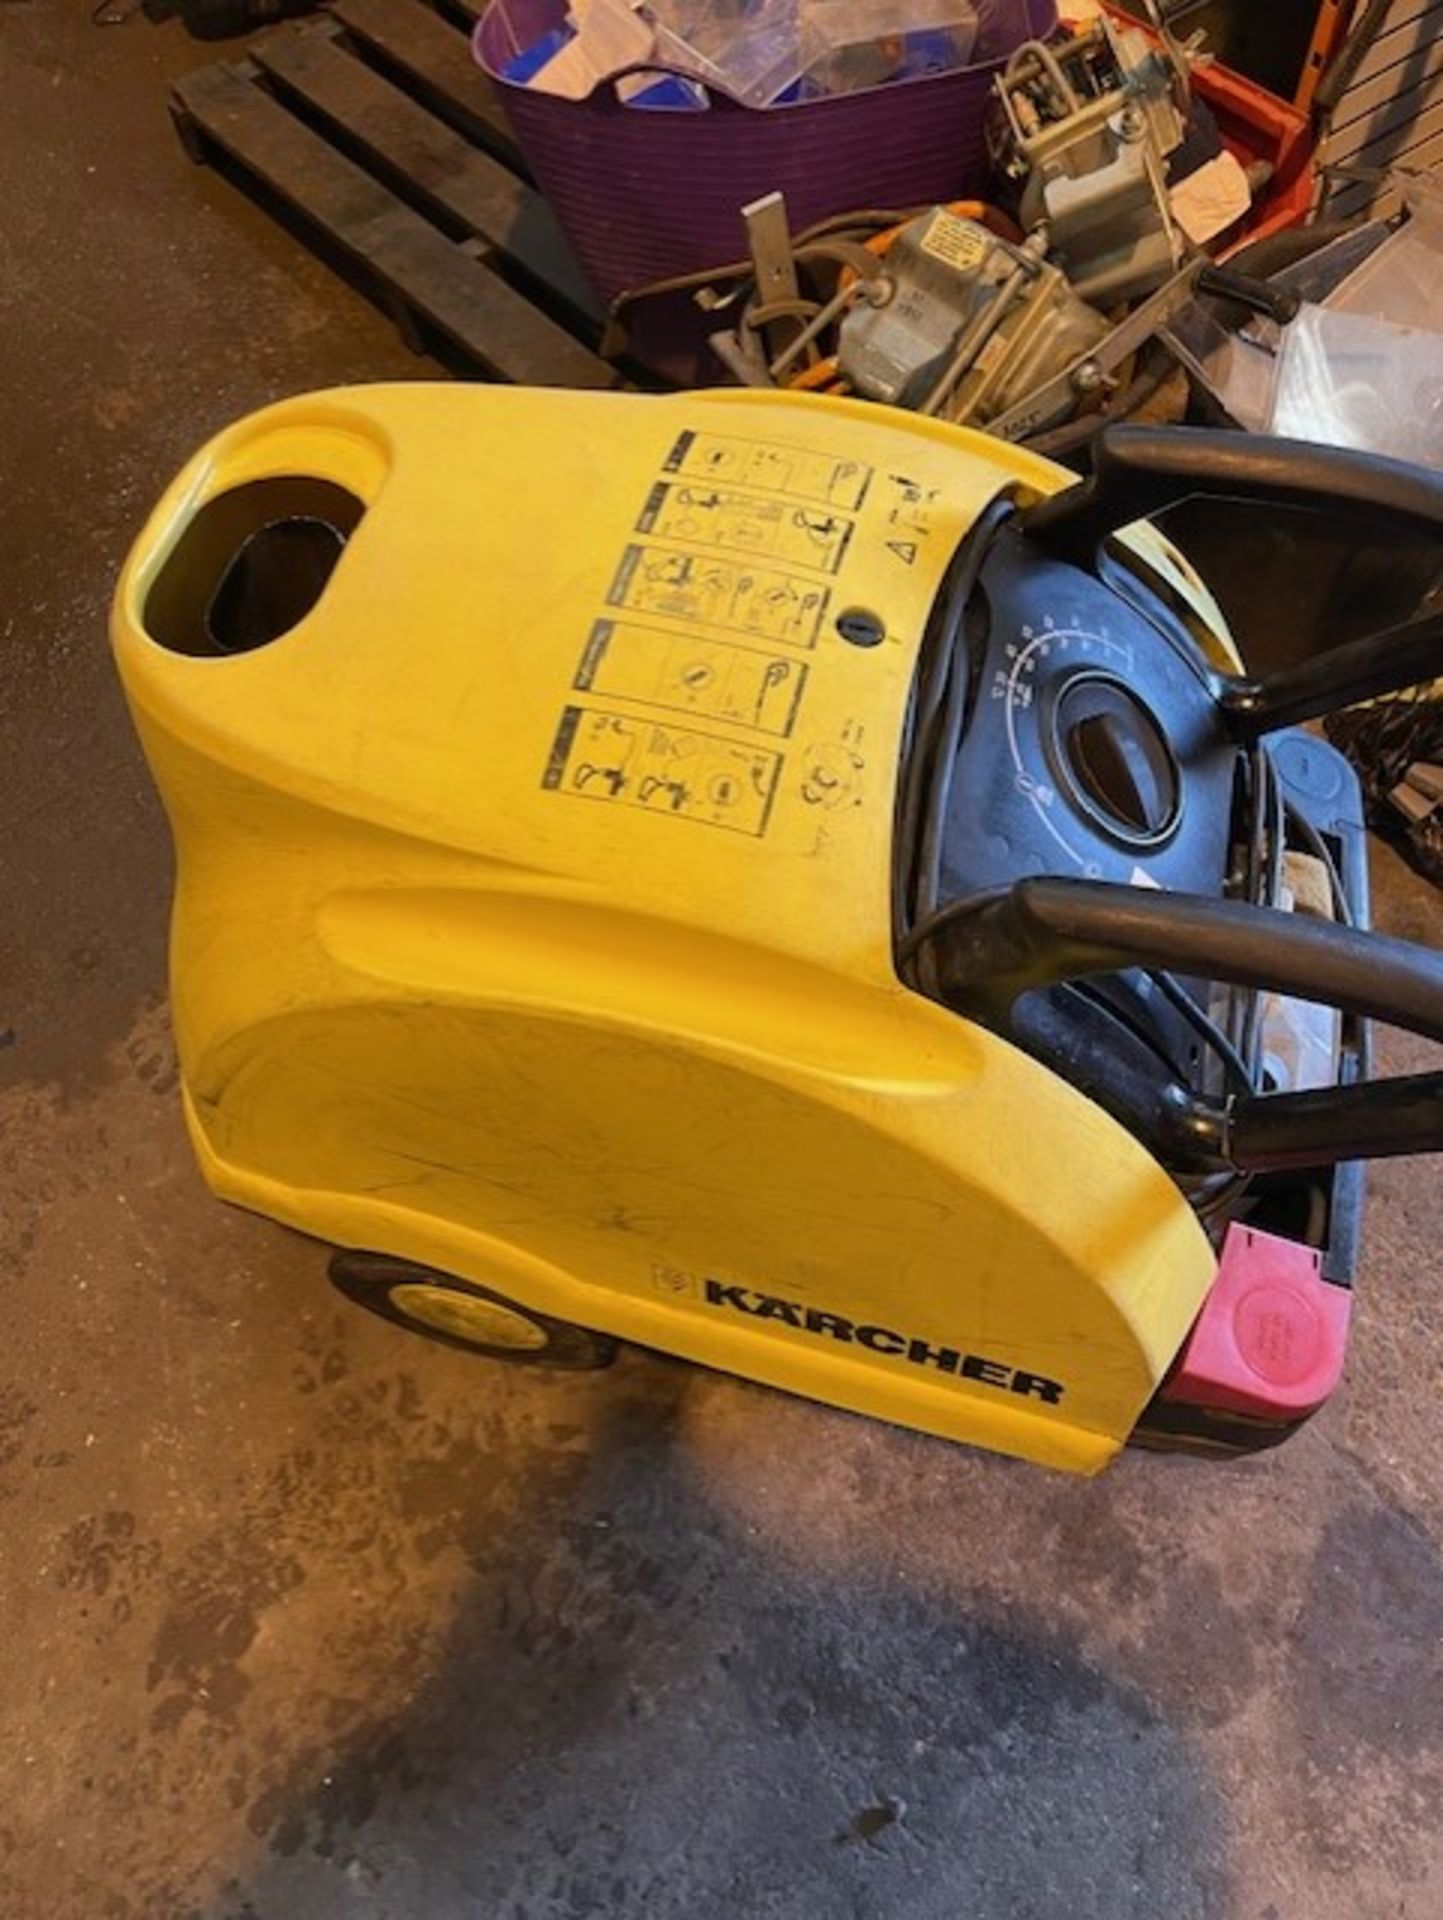 Karcher hot and cold pressure washer hds551 c model it’s in good condition still comes with hose and - Image 9 of 10